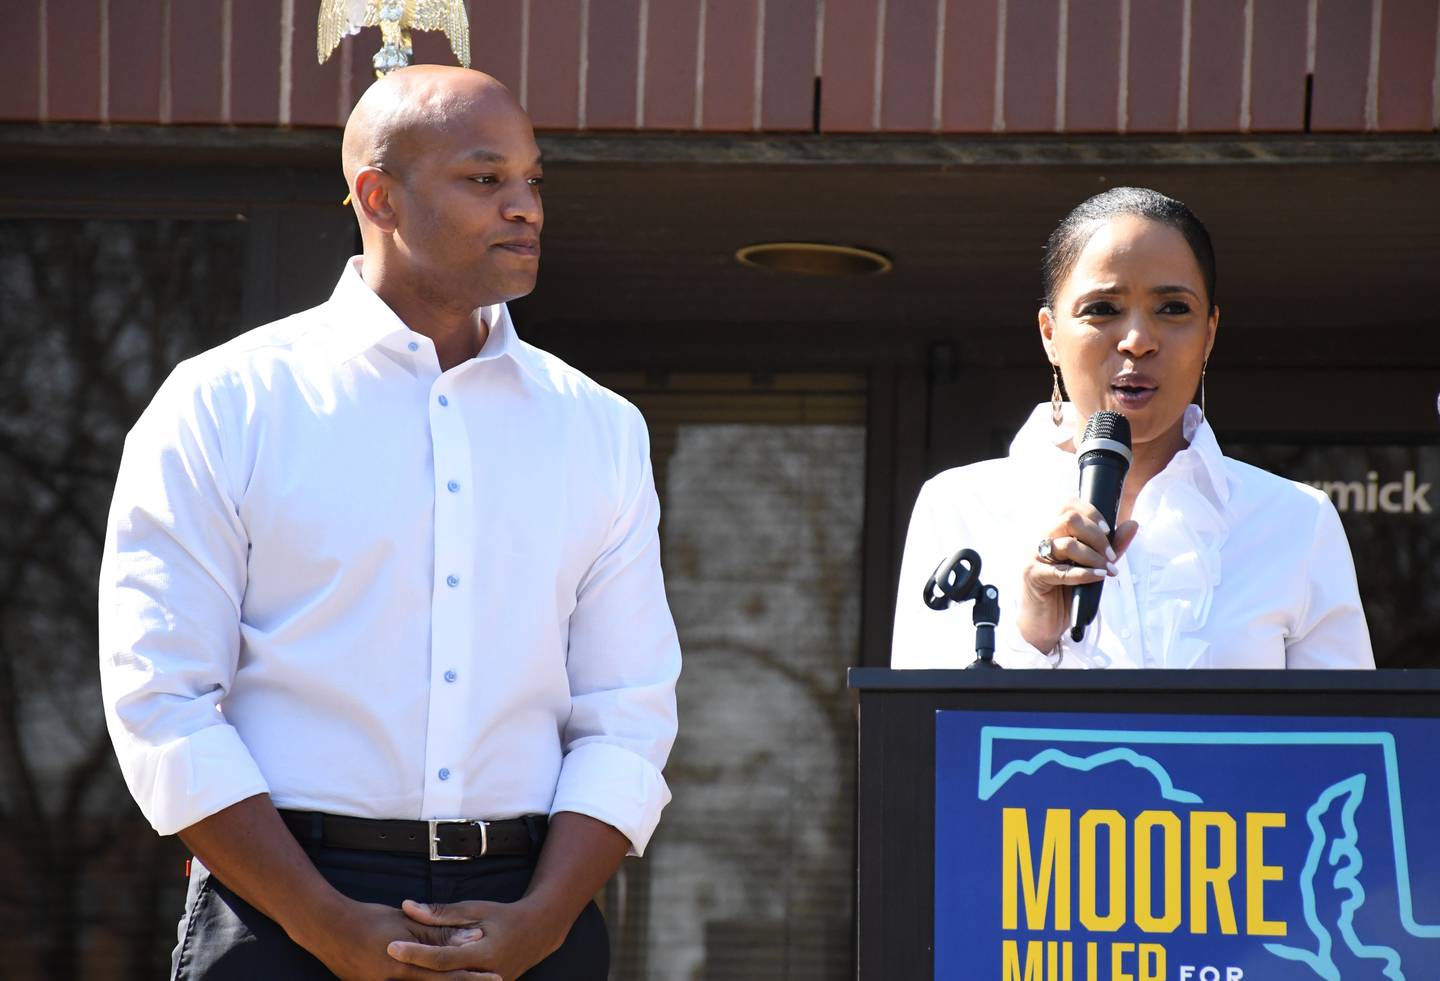 Prince George's County Executive Angela Alsobrooks, right, endorses gubernatorial candidate Wes Moore in March 2022 at the Moore campaign's office opening in that county. Moore went on to win the Democratic primary and the general election.